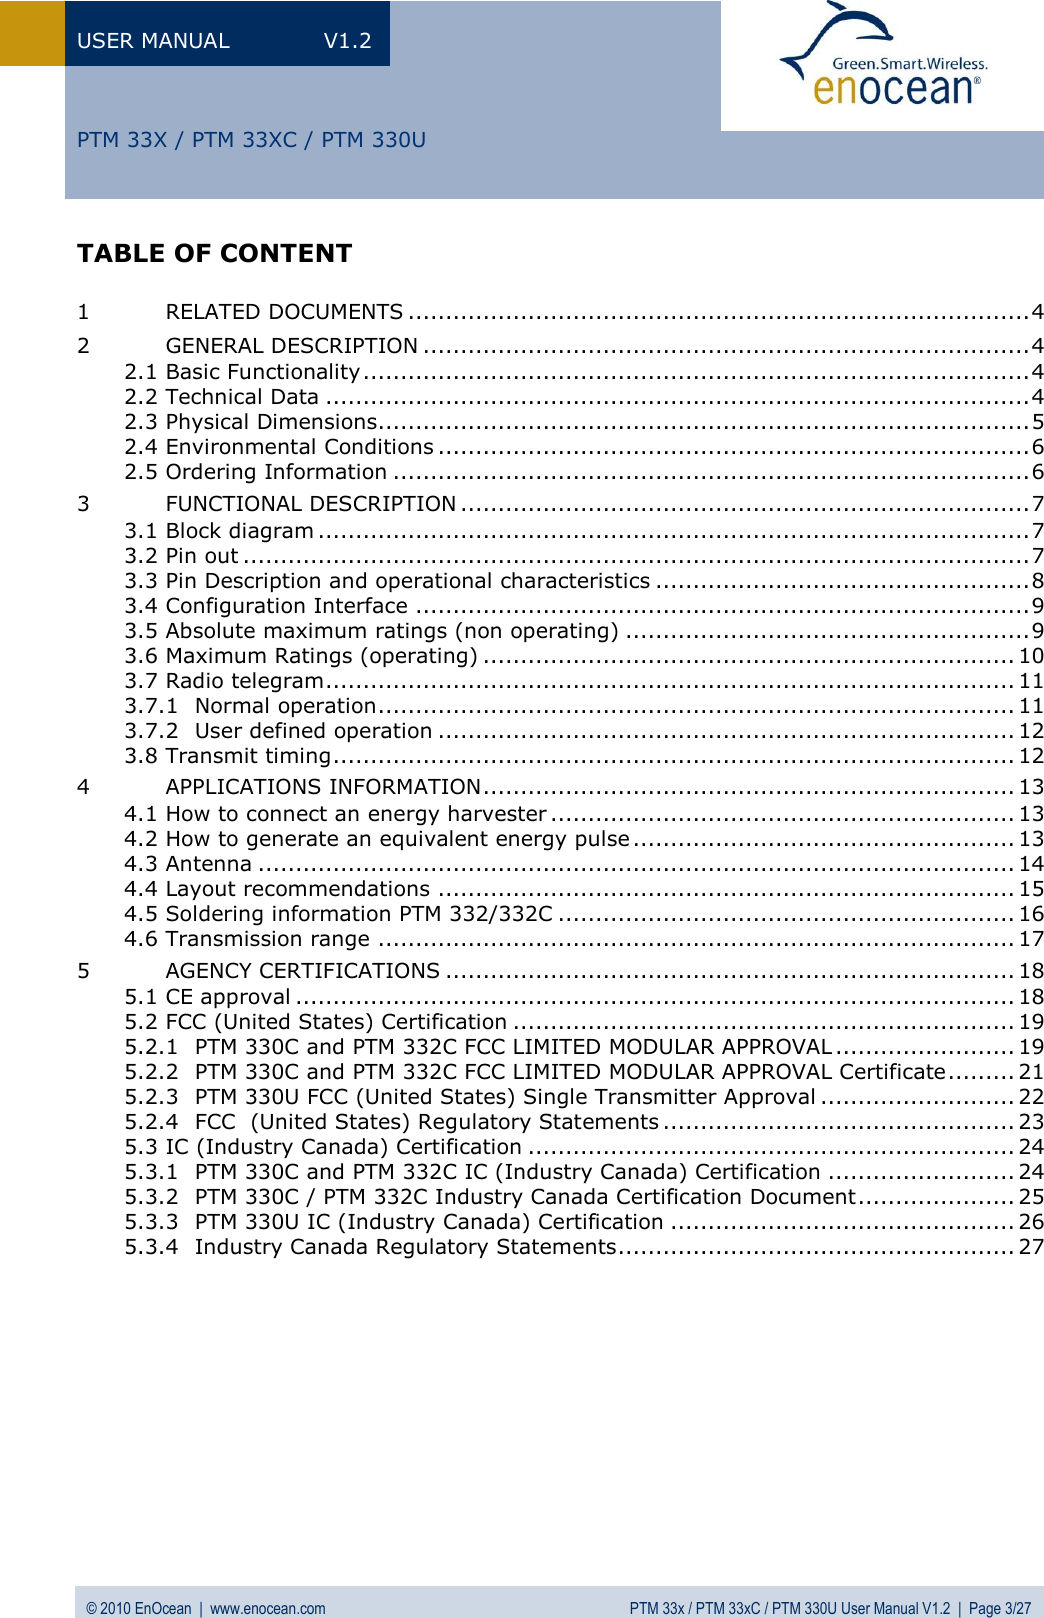 USER MANUAL  V1.2 © 2010 EnOcean  |  www.enocean.com  PTM 33x / PTM 33xC / PTM 330U User Manual V1.2  |  Page 3/27   PTM 33X / PTM 33XC / PTM 330U TABLE OF CONTENT  1 RELATED DOCUMENTS ................................................................................... 4 2 GENERAL DESCRIPTION ................................................................................. 4 2.1 Basic Functionality ......................................................................................... 4 2.2 Technical Data .............................................................................................. 4 2.3 Physical Dimensions....................................................................................... 5 2.4 Environmental Conditions ............................................................................... 6 2.5 Ordering Information ..................................................................................... 6 3 FUNCTIONAL DESCRIPTION ............................................................................ 7 3.1 Block diagram ............................................................................................... 7 3.2 Pin out ......................................................................................................... 7 3.3 Pin Description and operational characteristics .................................................. 8 3.4 Configuration Interface .................................................................................. 9 3.5 Absolute maximum ratings (non operating) ...................................................... 9 3.6 Maximum Ratings (operating) ....................................................................... 10 3.7 Radio telegram ............................................................................................ 11 3.7.1 Normal operation ..................................................................................... 11 3.7.2 User defined operation ............................................................................. 12 3.8 Transmit timing ........................................................................................... 12 4 APPLICATIONS INFORMATION ....................................................................... 13 4.1 How to connect an energy harvester .............................................................. 13 4.2 How to generate an equivalent energy pulse ................................................... 13 4.3 Antenna ..................................................................................................... 14 4.4 Layout recommendations ............................................................................. 15 4.5 Soldering information PTM 332/332C ............................................................. 16 4.6 Transmission range ..................................................................................... 17 5 AGENCY CERTIFICATIONS ............................................................................ 18 5.1 CE approval ................................................................................................ 18 5.2 FCC (United States) Certification ................................................................... 19 5.2.1 PTM 330C and PTM 332C FCC LIMITED MODULAR APPROVAL ........................ 19 5.2.2 PTM 330C and PTM 332C FCC LIMITED MODULAR APPROVAL Certificate ......... 21 5.2.3 PTM 330U FCC (United States) Single Transmitter Approval .......................... 22 5.2.4 FCC  (United States) Regulatory Statements ............................................... 23 5.3 IC (Industry Canada) Certification ................................................................. 24 5.3.1 PTM 330C and PTM 332C IC (Industry Canada) Certification ......................... 24 5.3.2 PTM 330C / PTM 332C Industry Canada Certification Document ..................... 25 5.3.3 PTM 330U IC (Industry Canada) Certification .............................................. 26 5.3.4 Industry Canada Regulatory Statements ..................................................... 27  